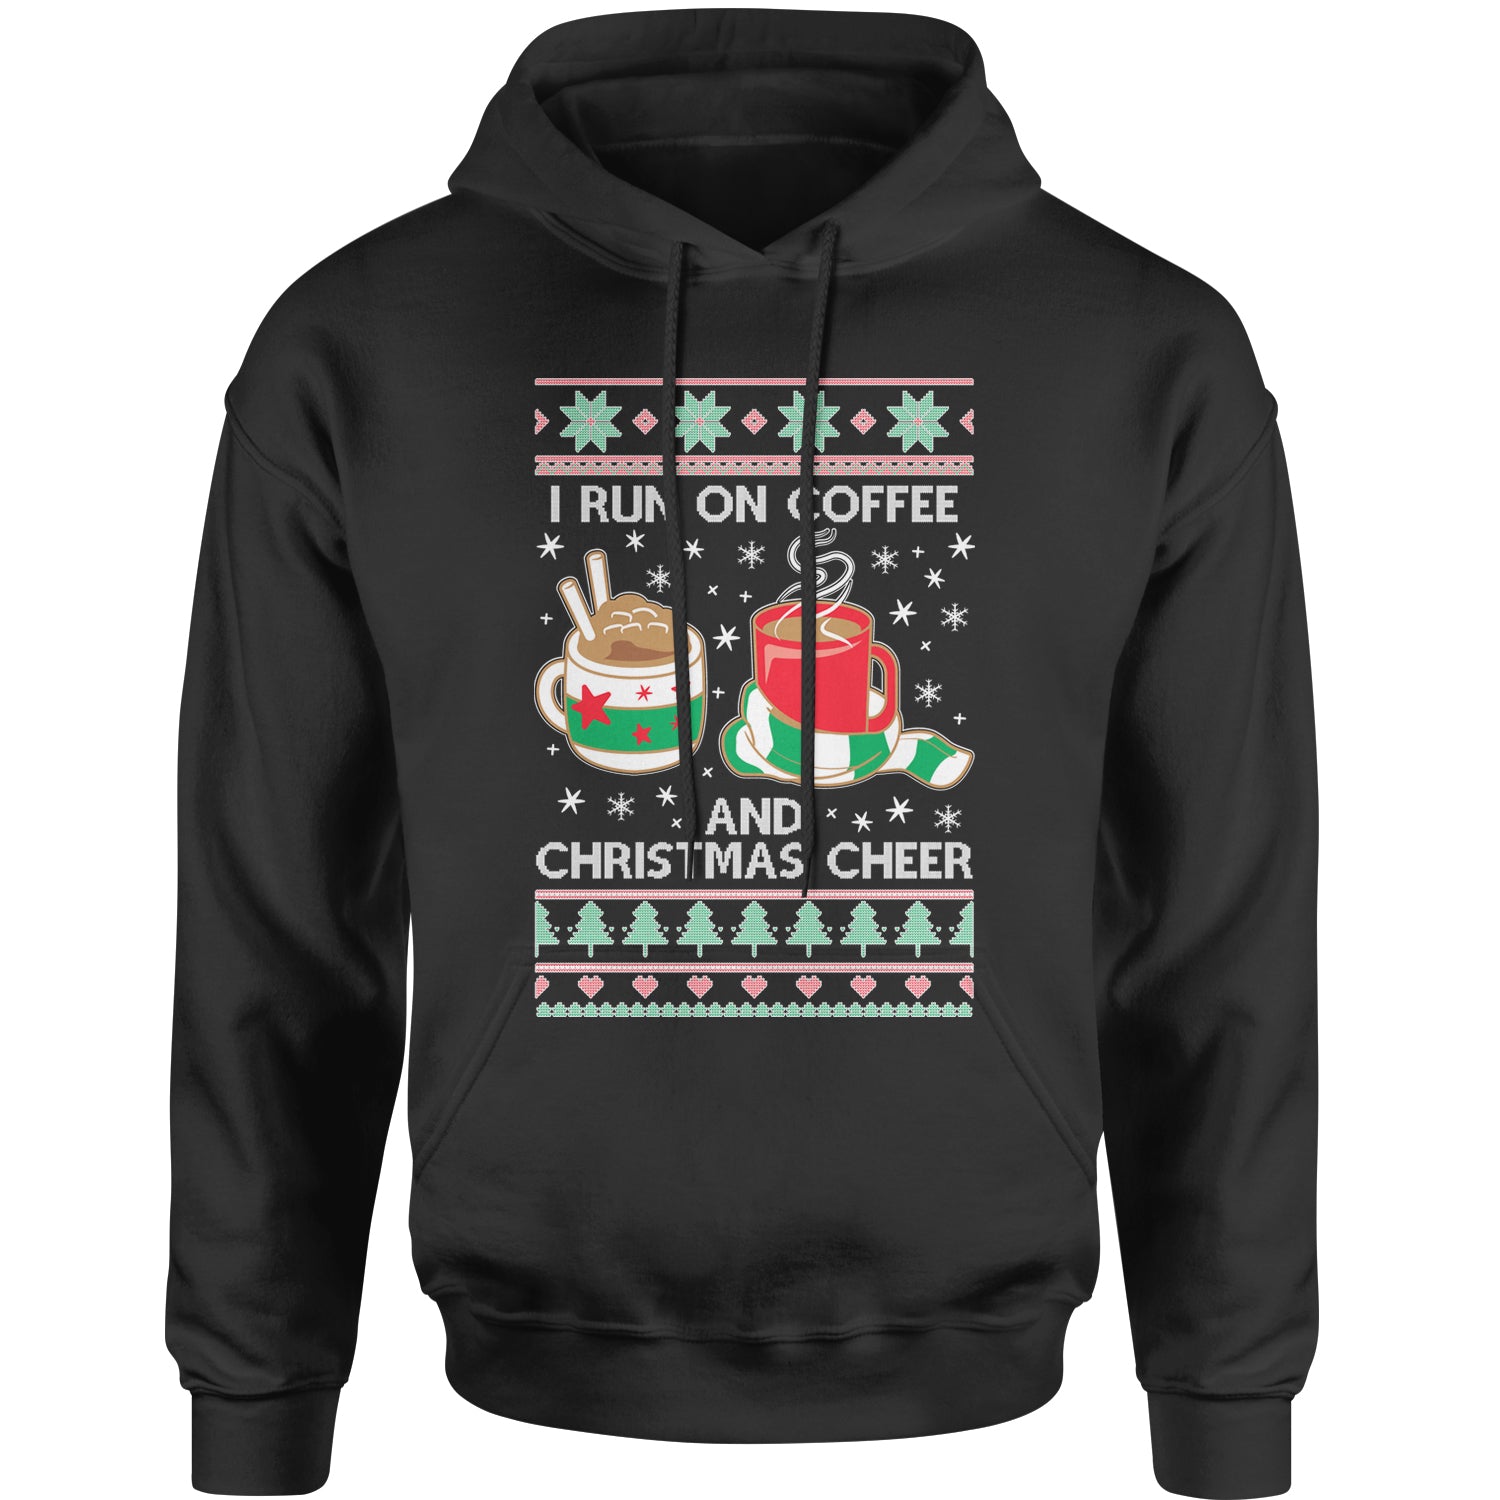 I Run On Coffee And Christmas Cheer Adult Hoodie Sweatshirt christmas, sweater, sweatshirt, ugly by Expression Tees